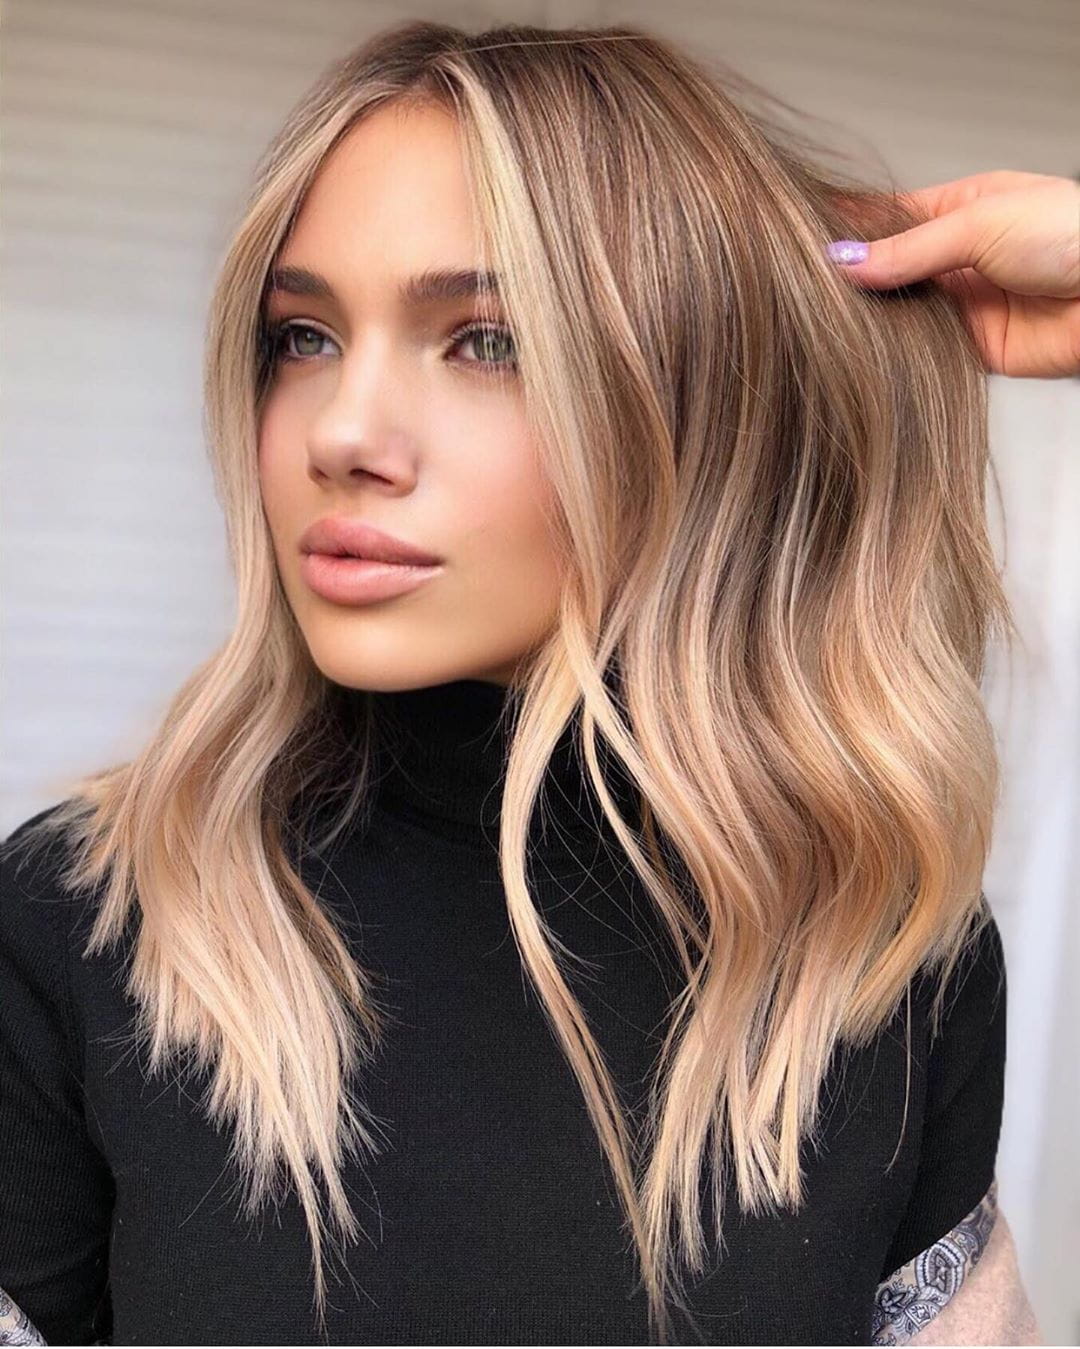 100+ Hairstyle And Hair Colors For Winter That Are Trending images 25